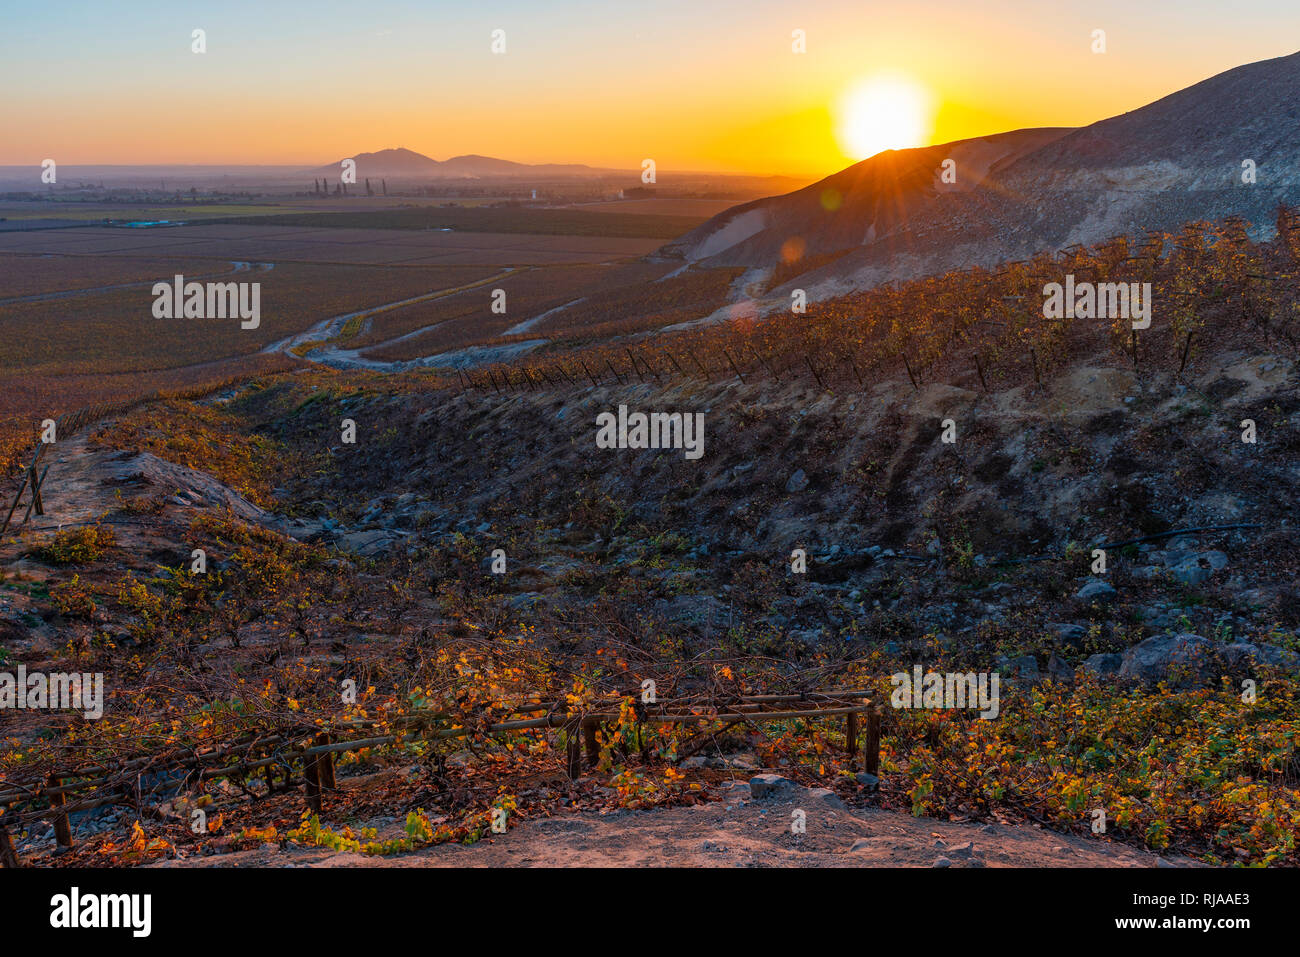 The vineyards of a winery on the hills of the Andes mountain range at sunset located in the desert of Ica near the city of Nazca, Peru. Stock Photo